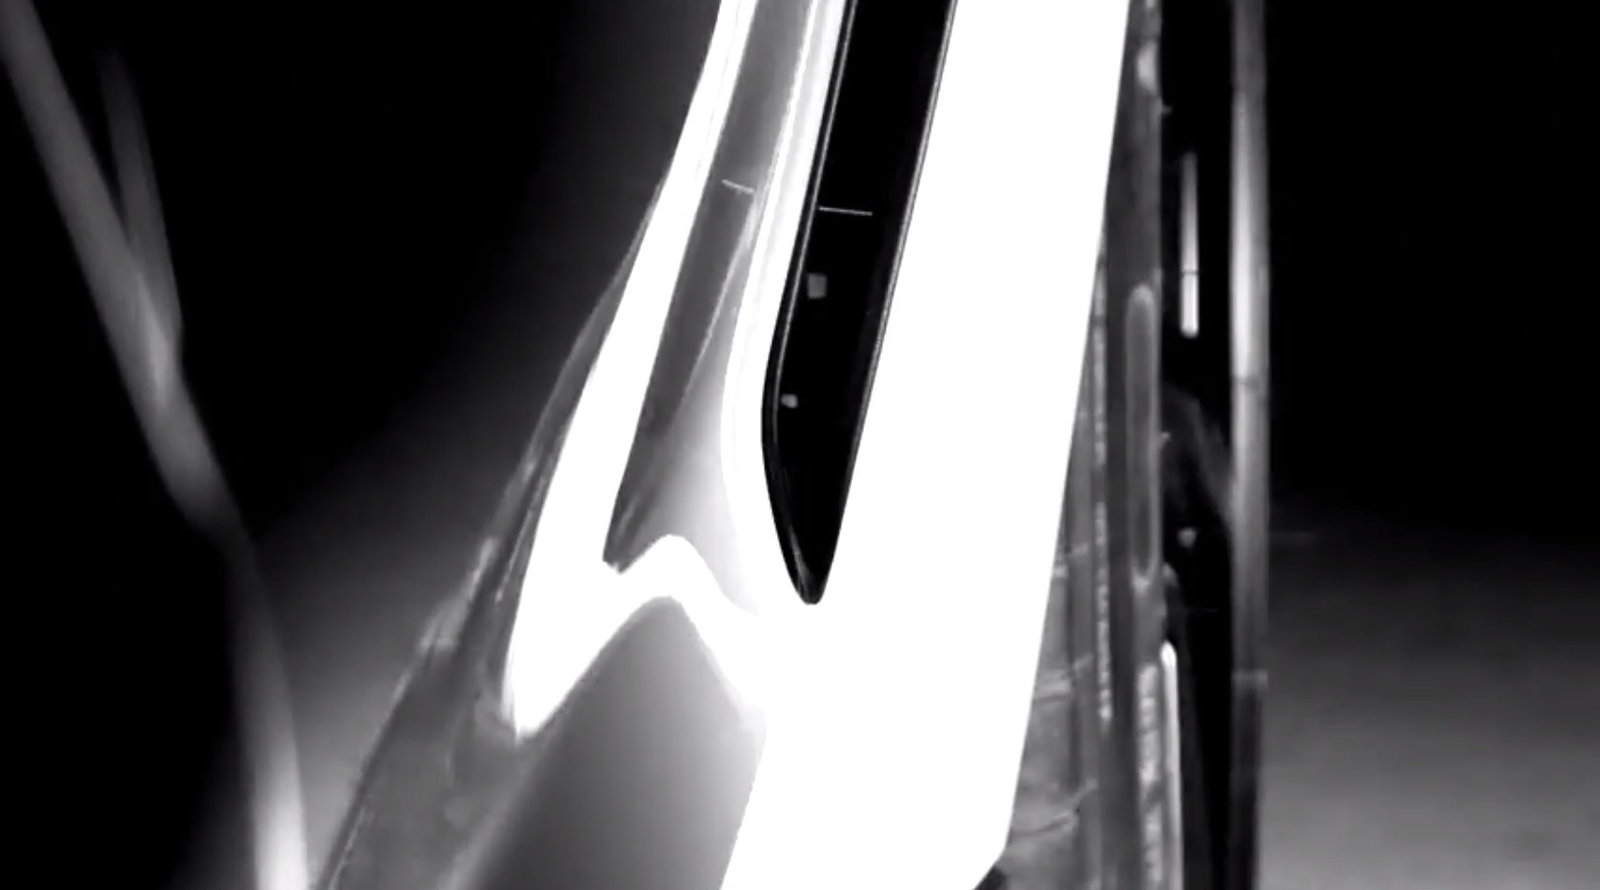 teaser-confirms-2016-shelby-mustang-gt350-new-details-emerge-video-photo-gallery_9.jpg